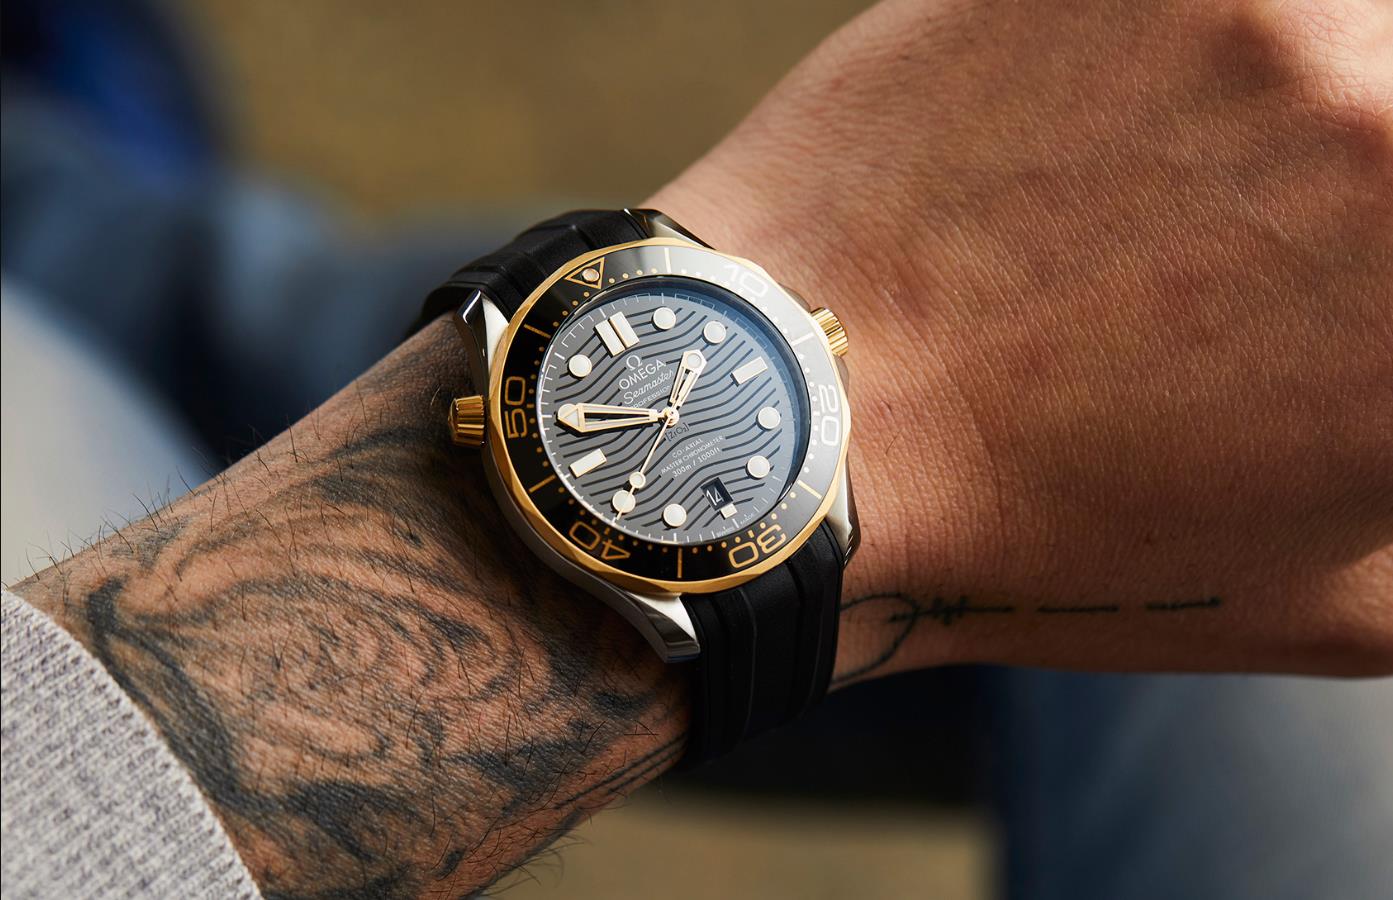 The black strap replica watch is designed for men.